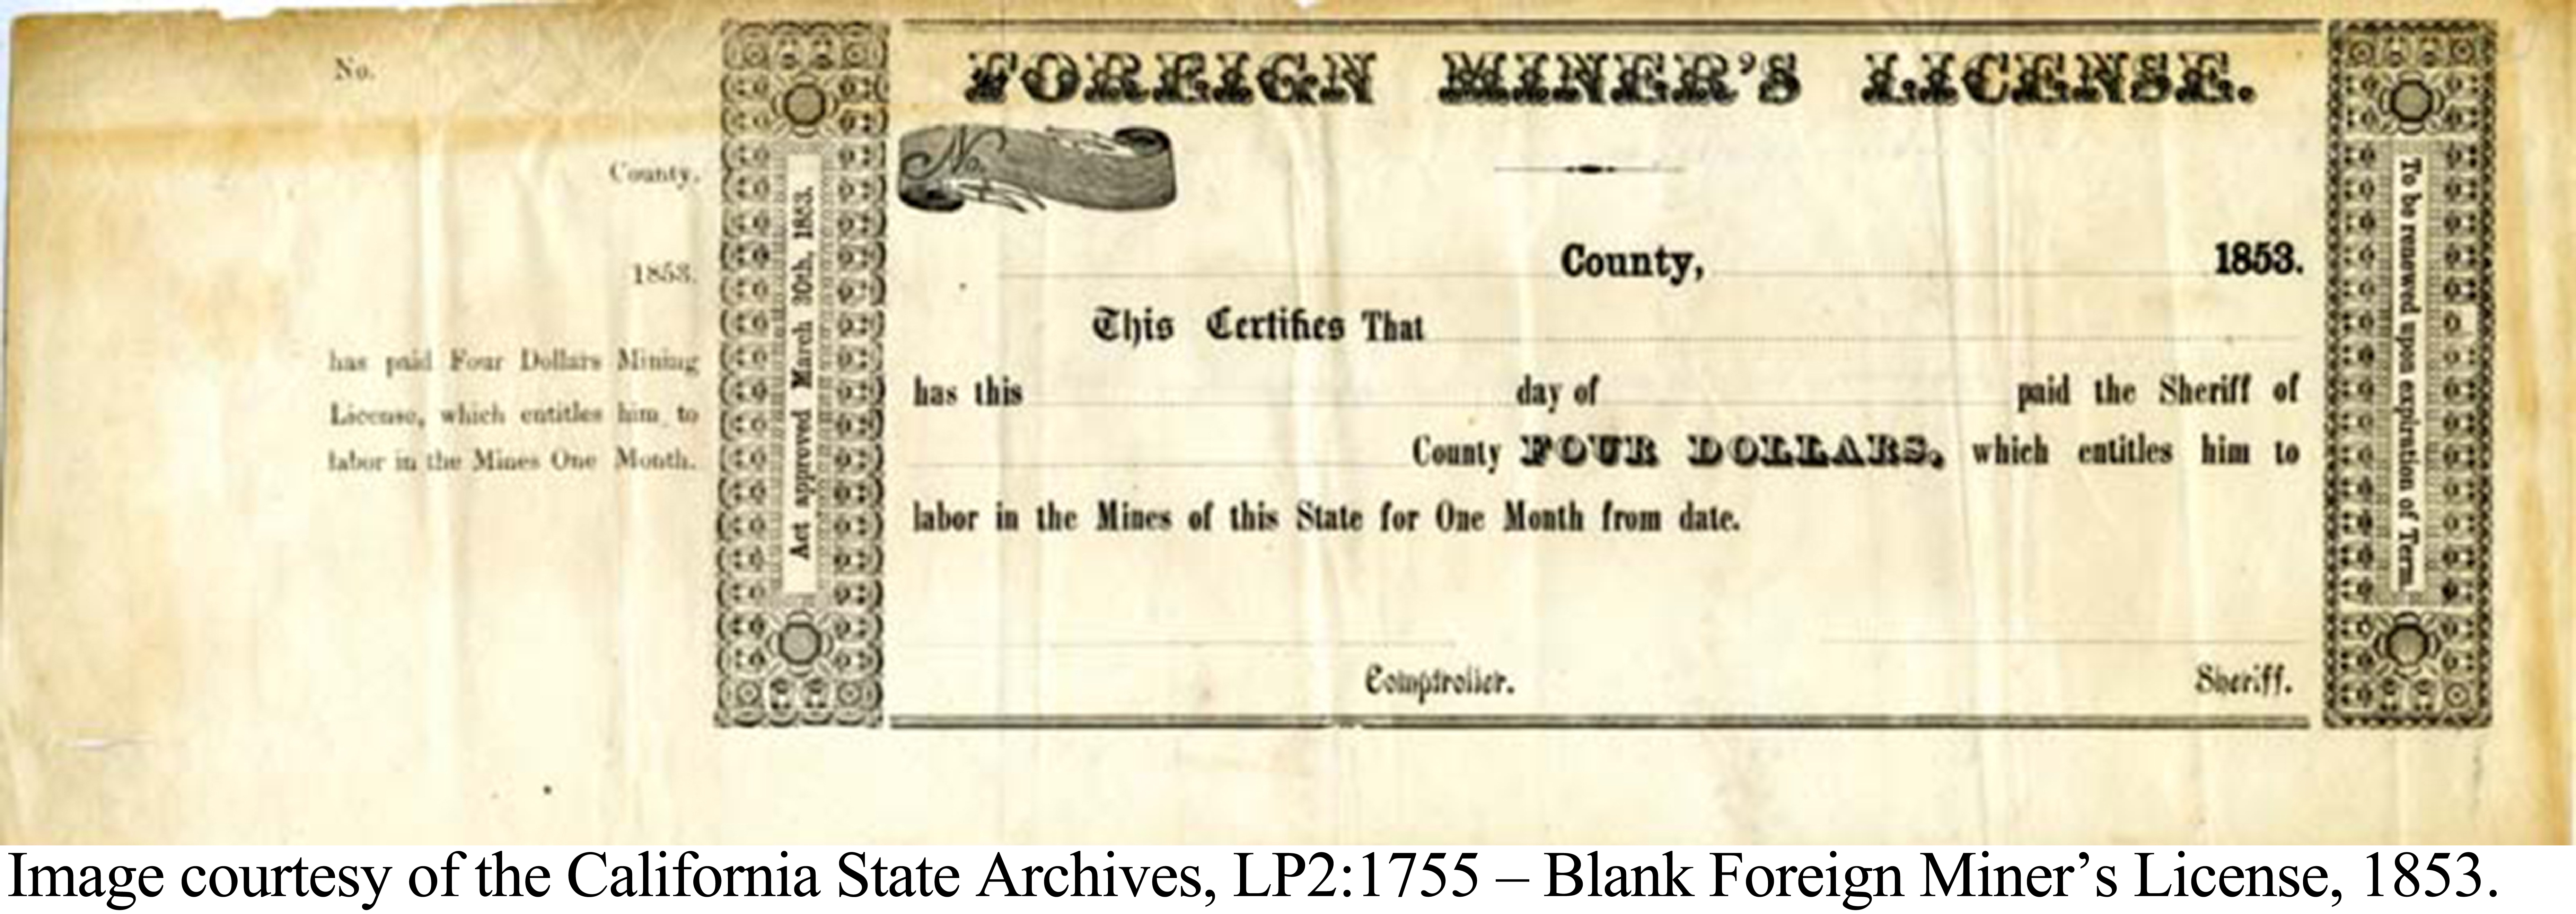 Blank foreign miner’s license